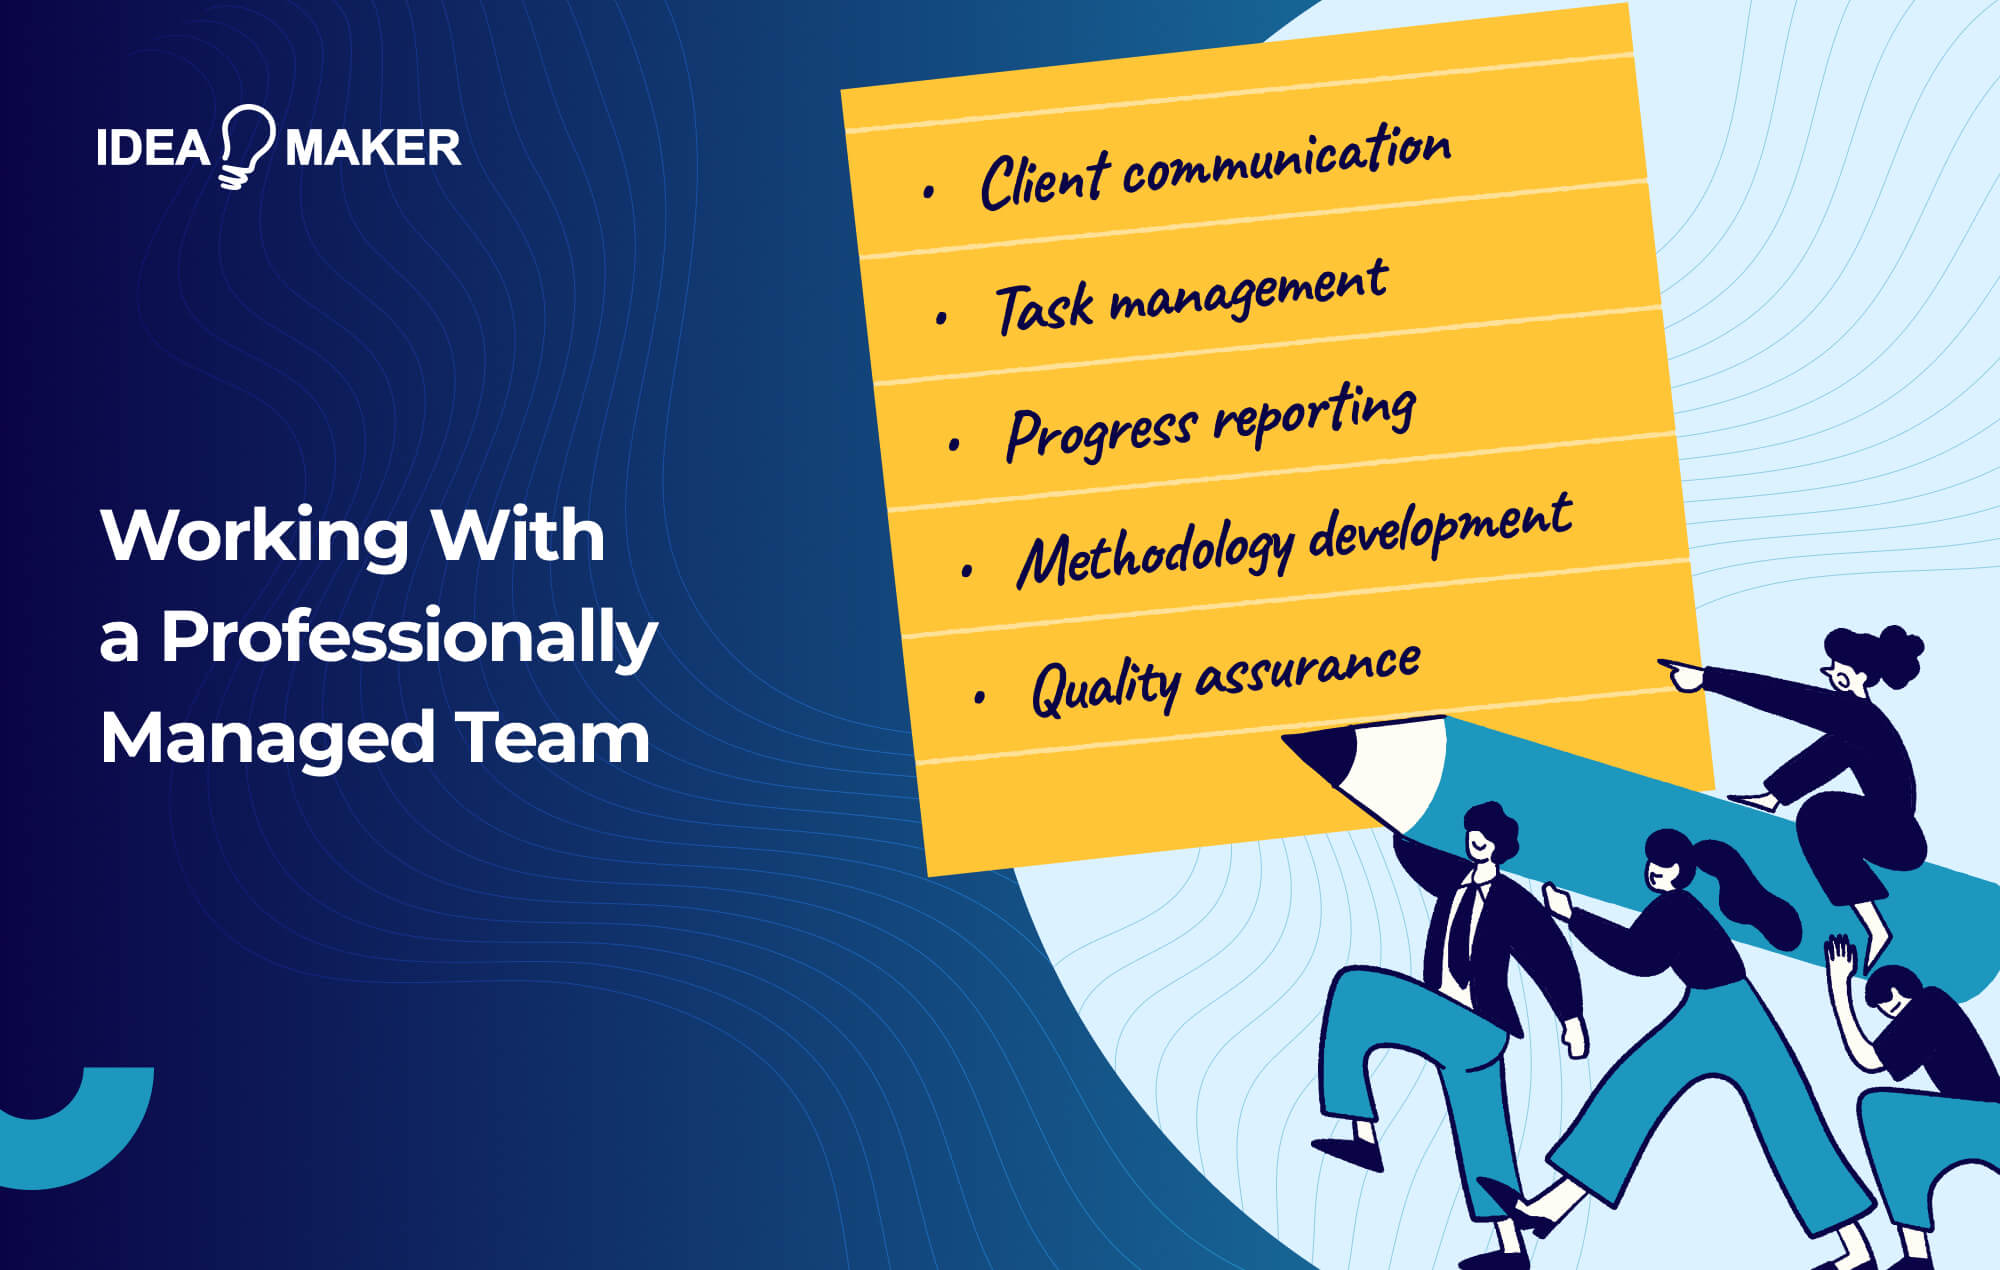 Ideamaker - Working With a Professionally Managed Team